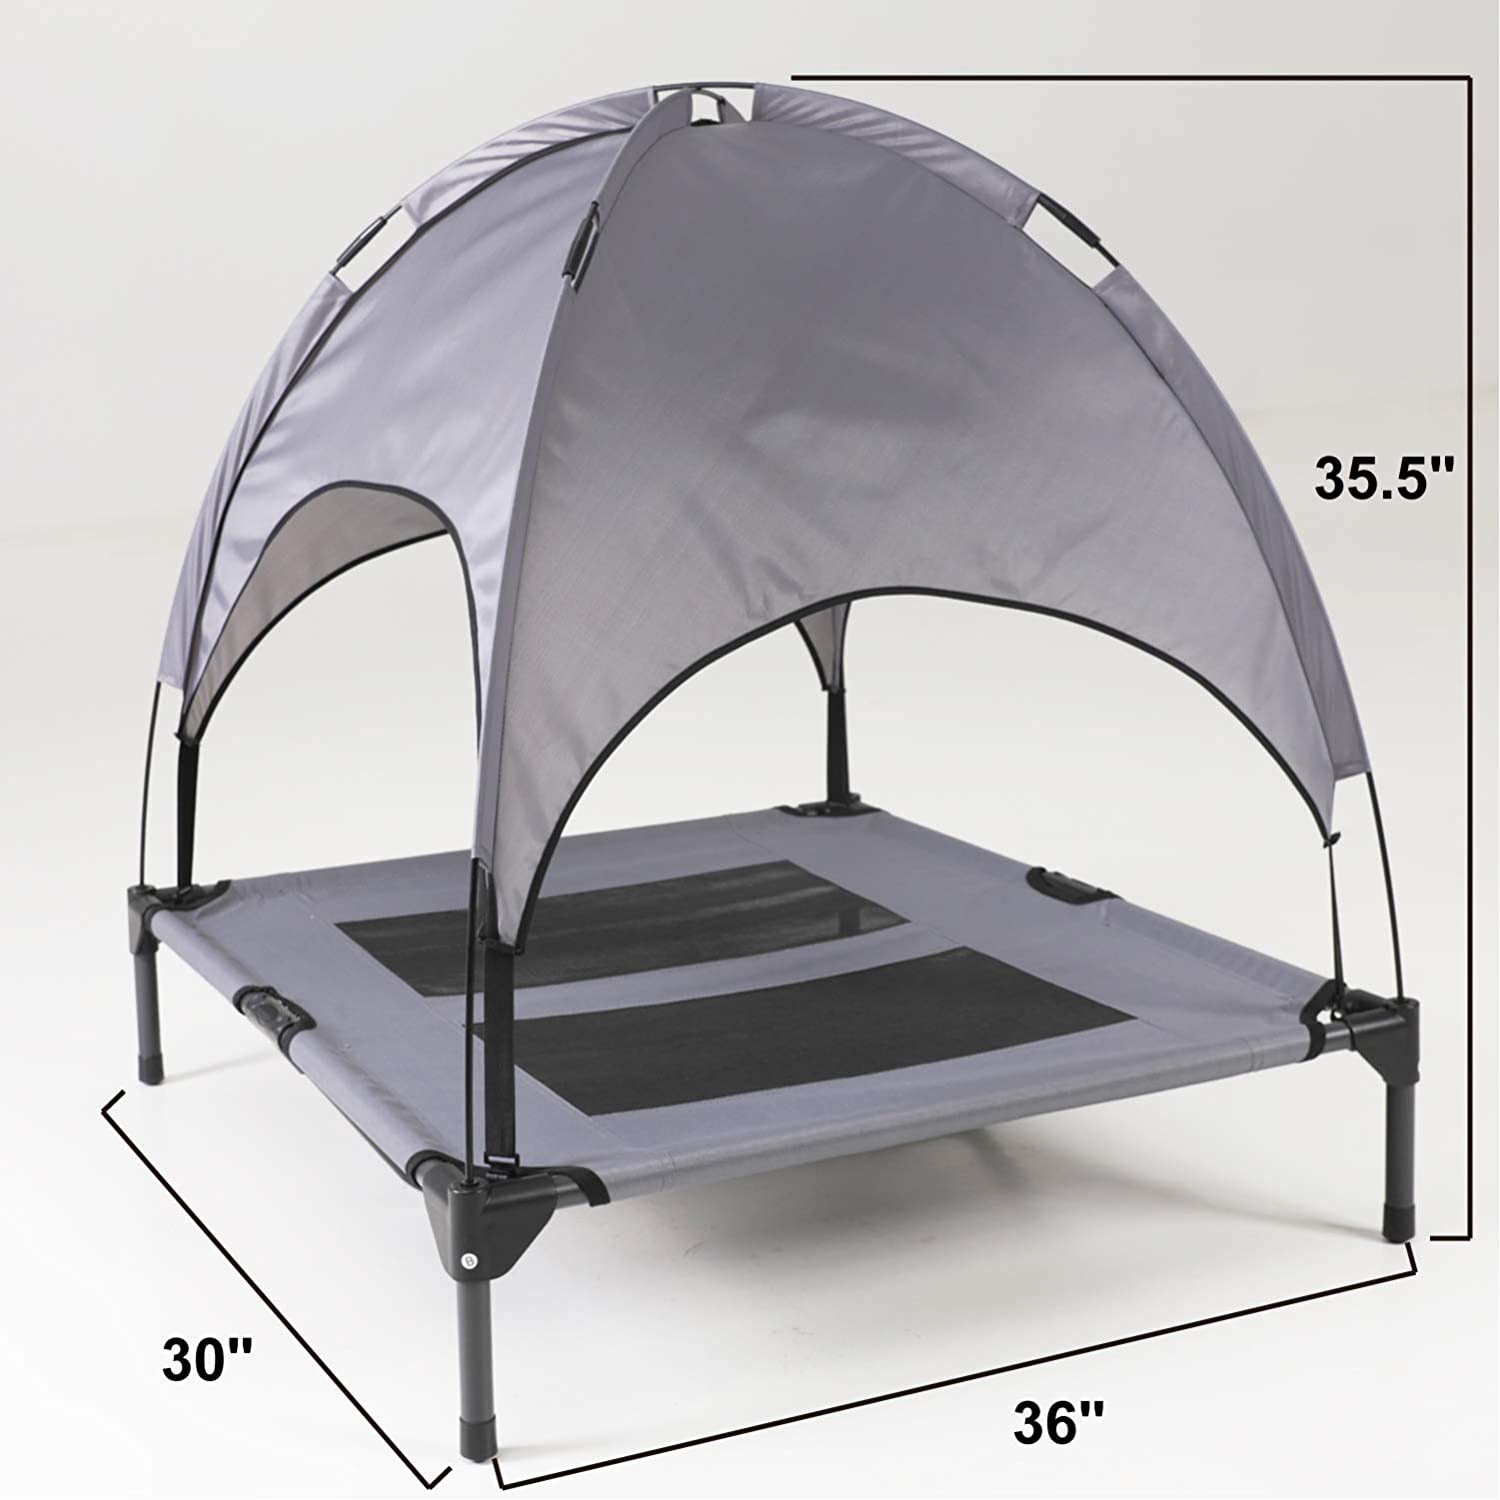 pet bed, pet supply. bed, tent, canopy, assembly, convenient, portable, comfortable, shade, large, medium, grey, mat, dog, cat, animal